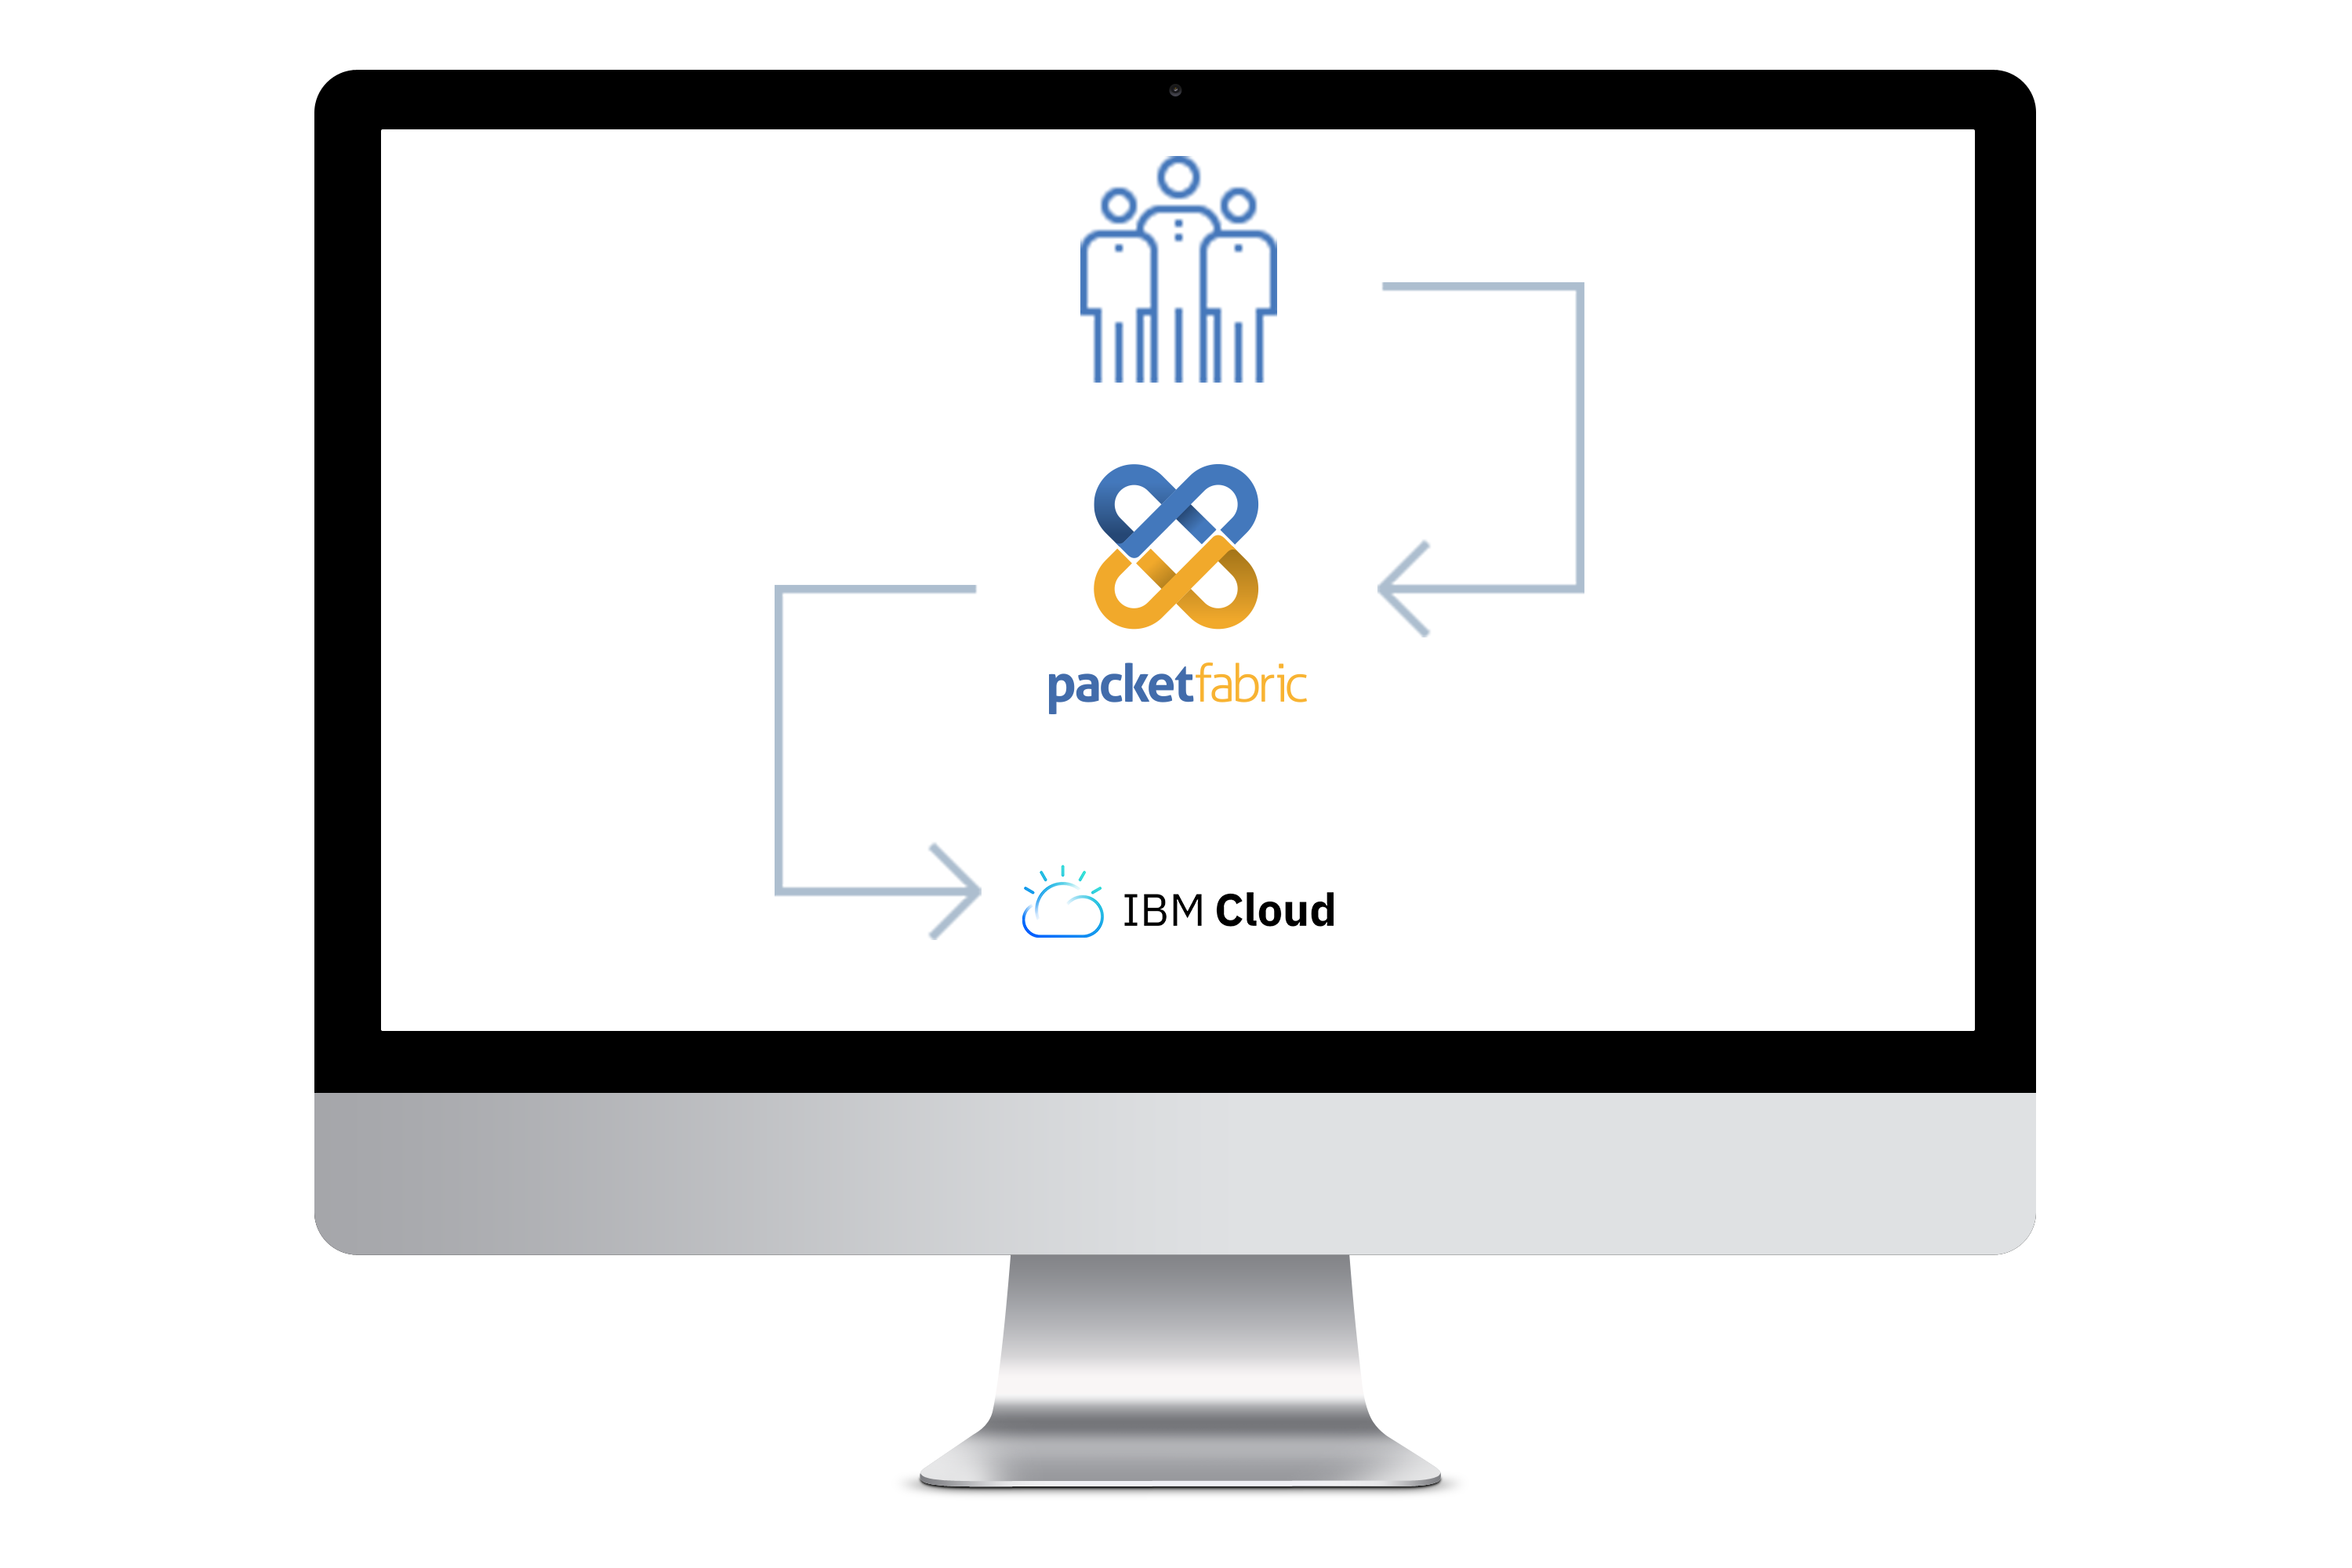 PacketFabric offers direct, secure access to IBM Cloud